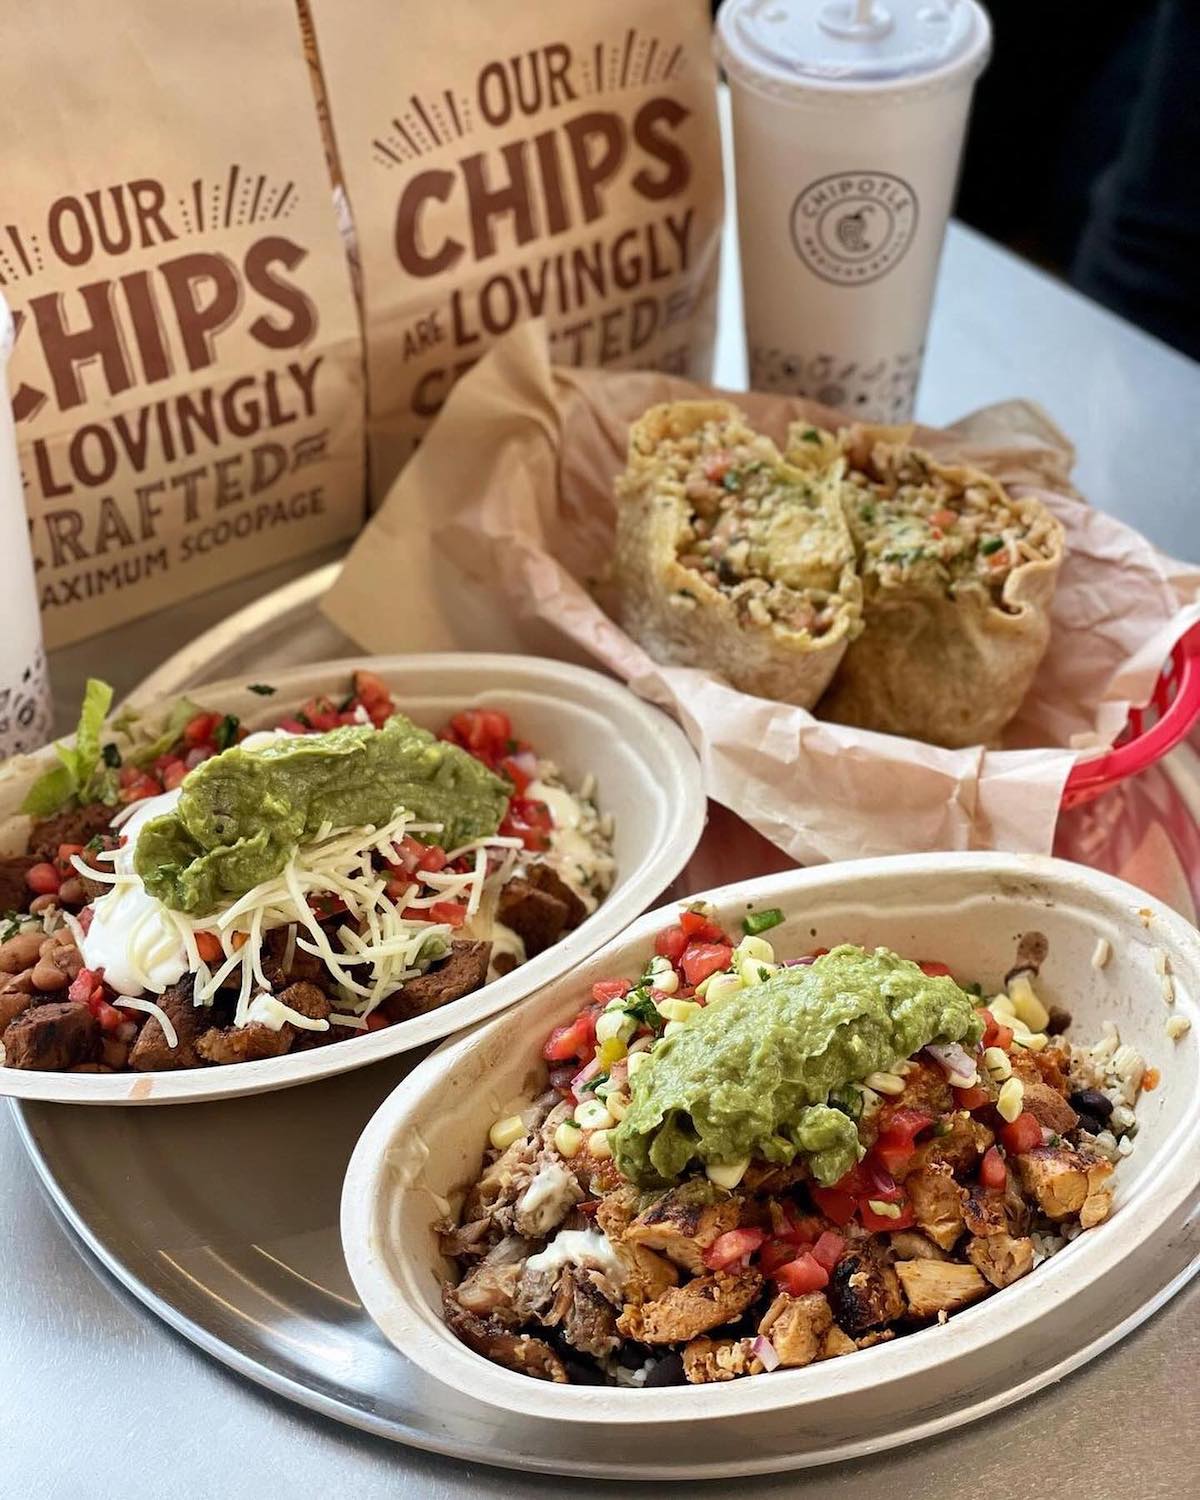 New Chipotle Location Planned for St. Petersburg